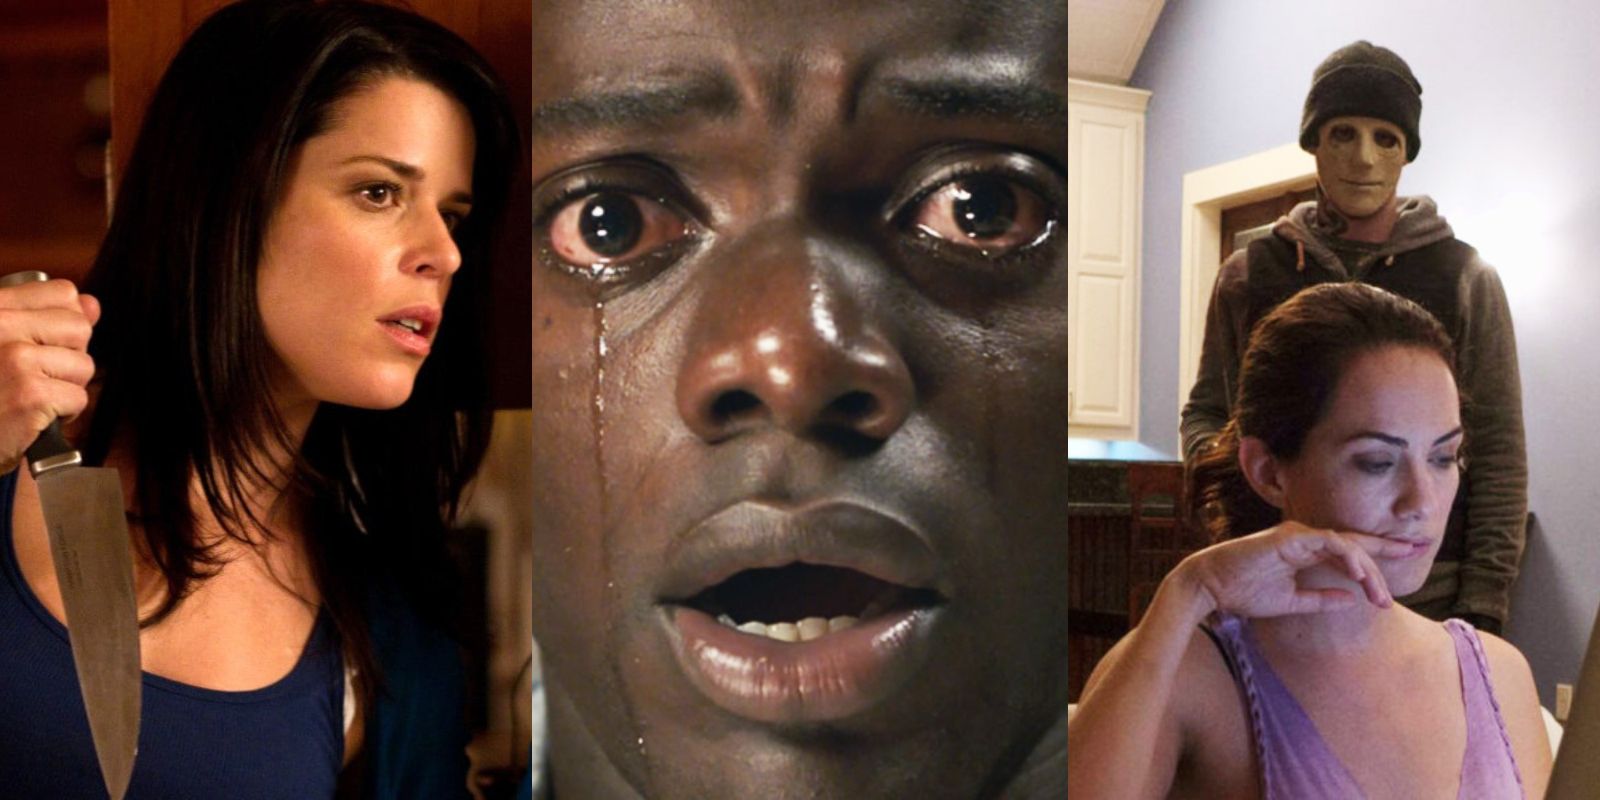 Split image: Neve Campbell holds a knif in Scream, Daniel Kaluuya cries in Get Out and the killer stalks a victim in Hush